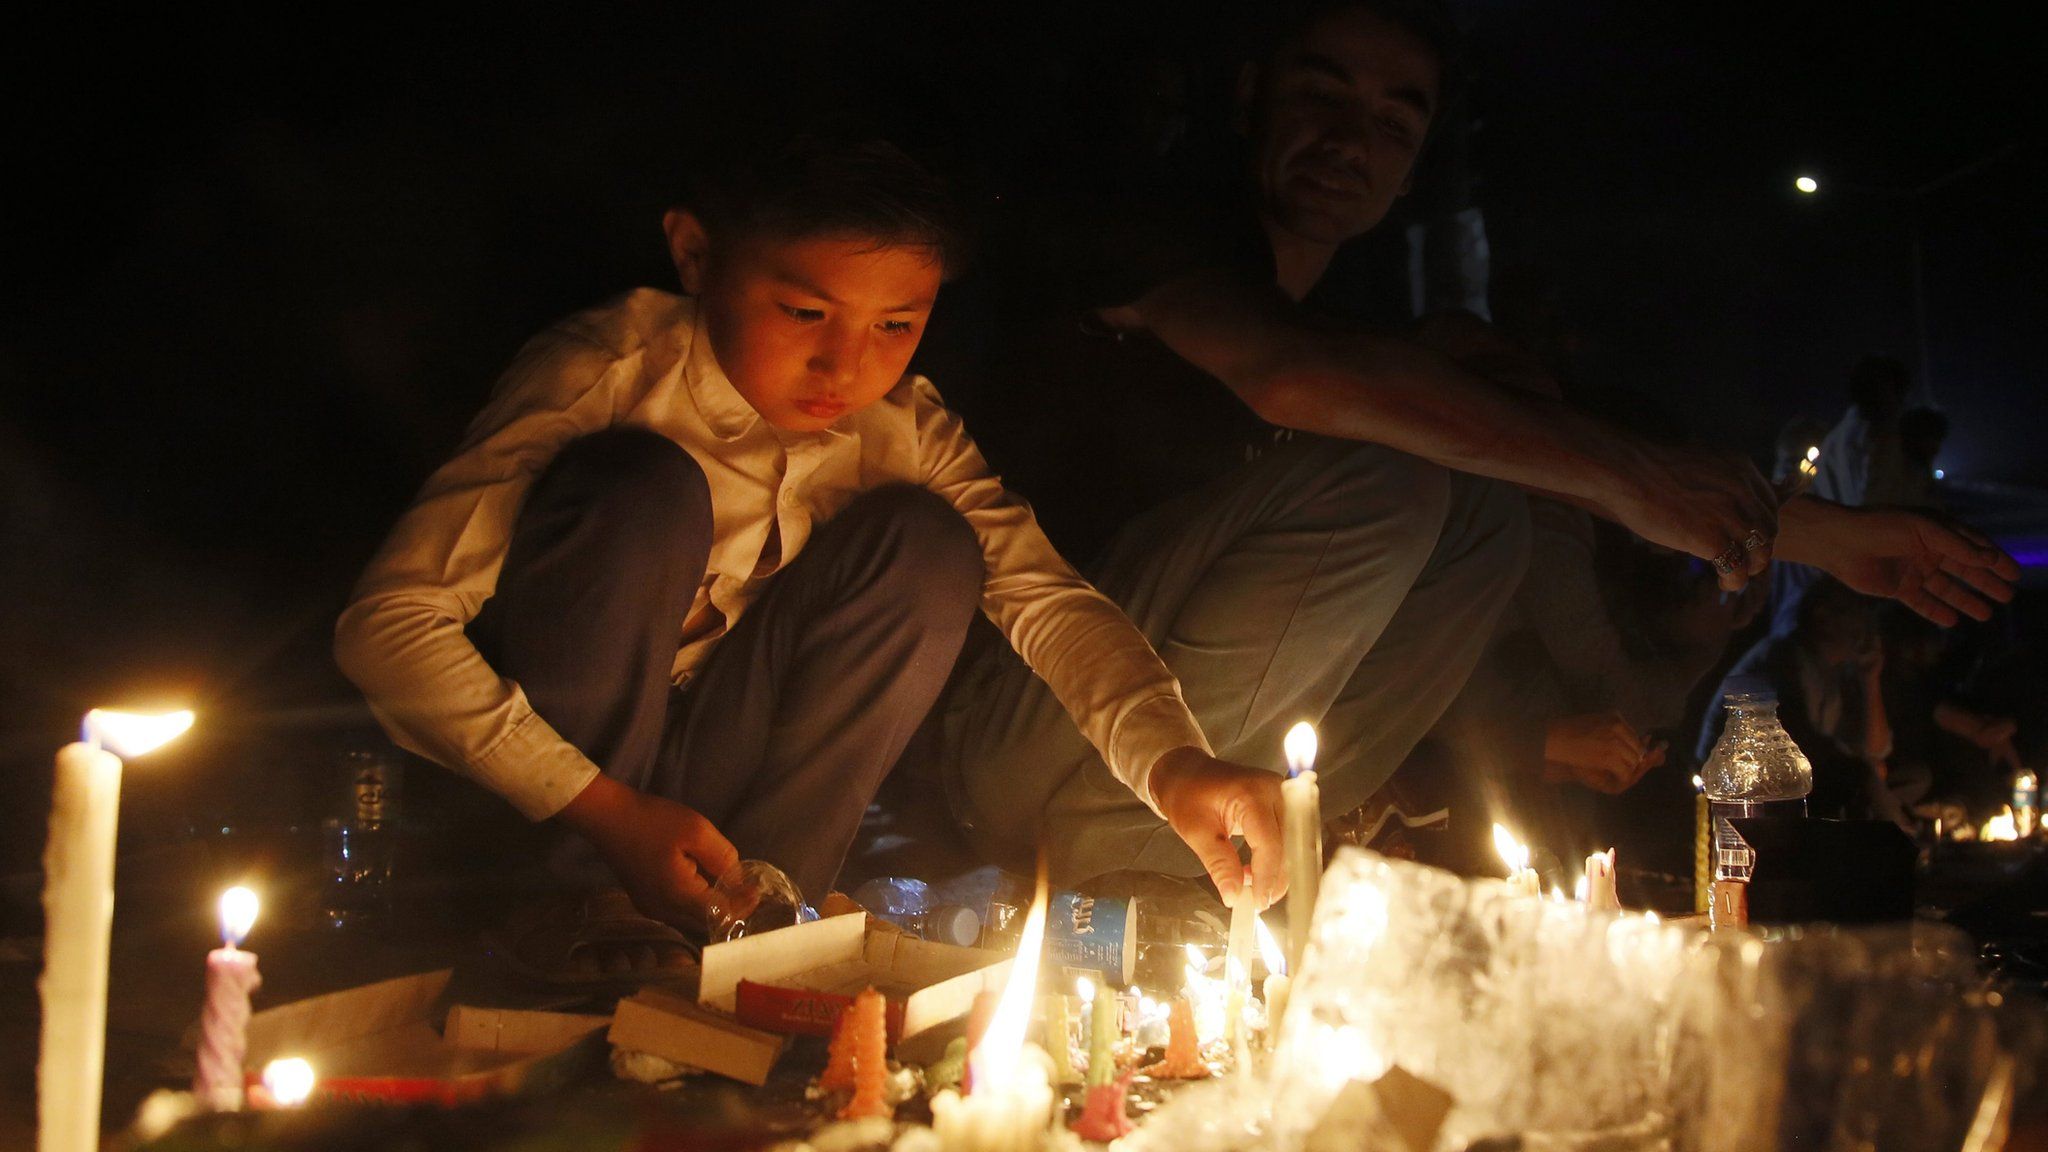 Candles lit during memorial for victims of suicide bomb blast in Kabul. 23 July 2016